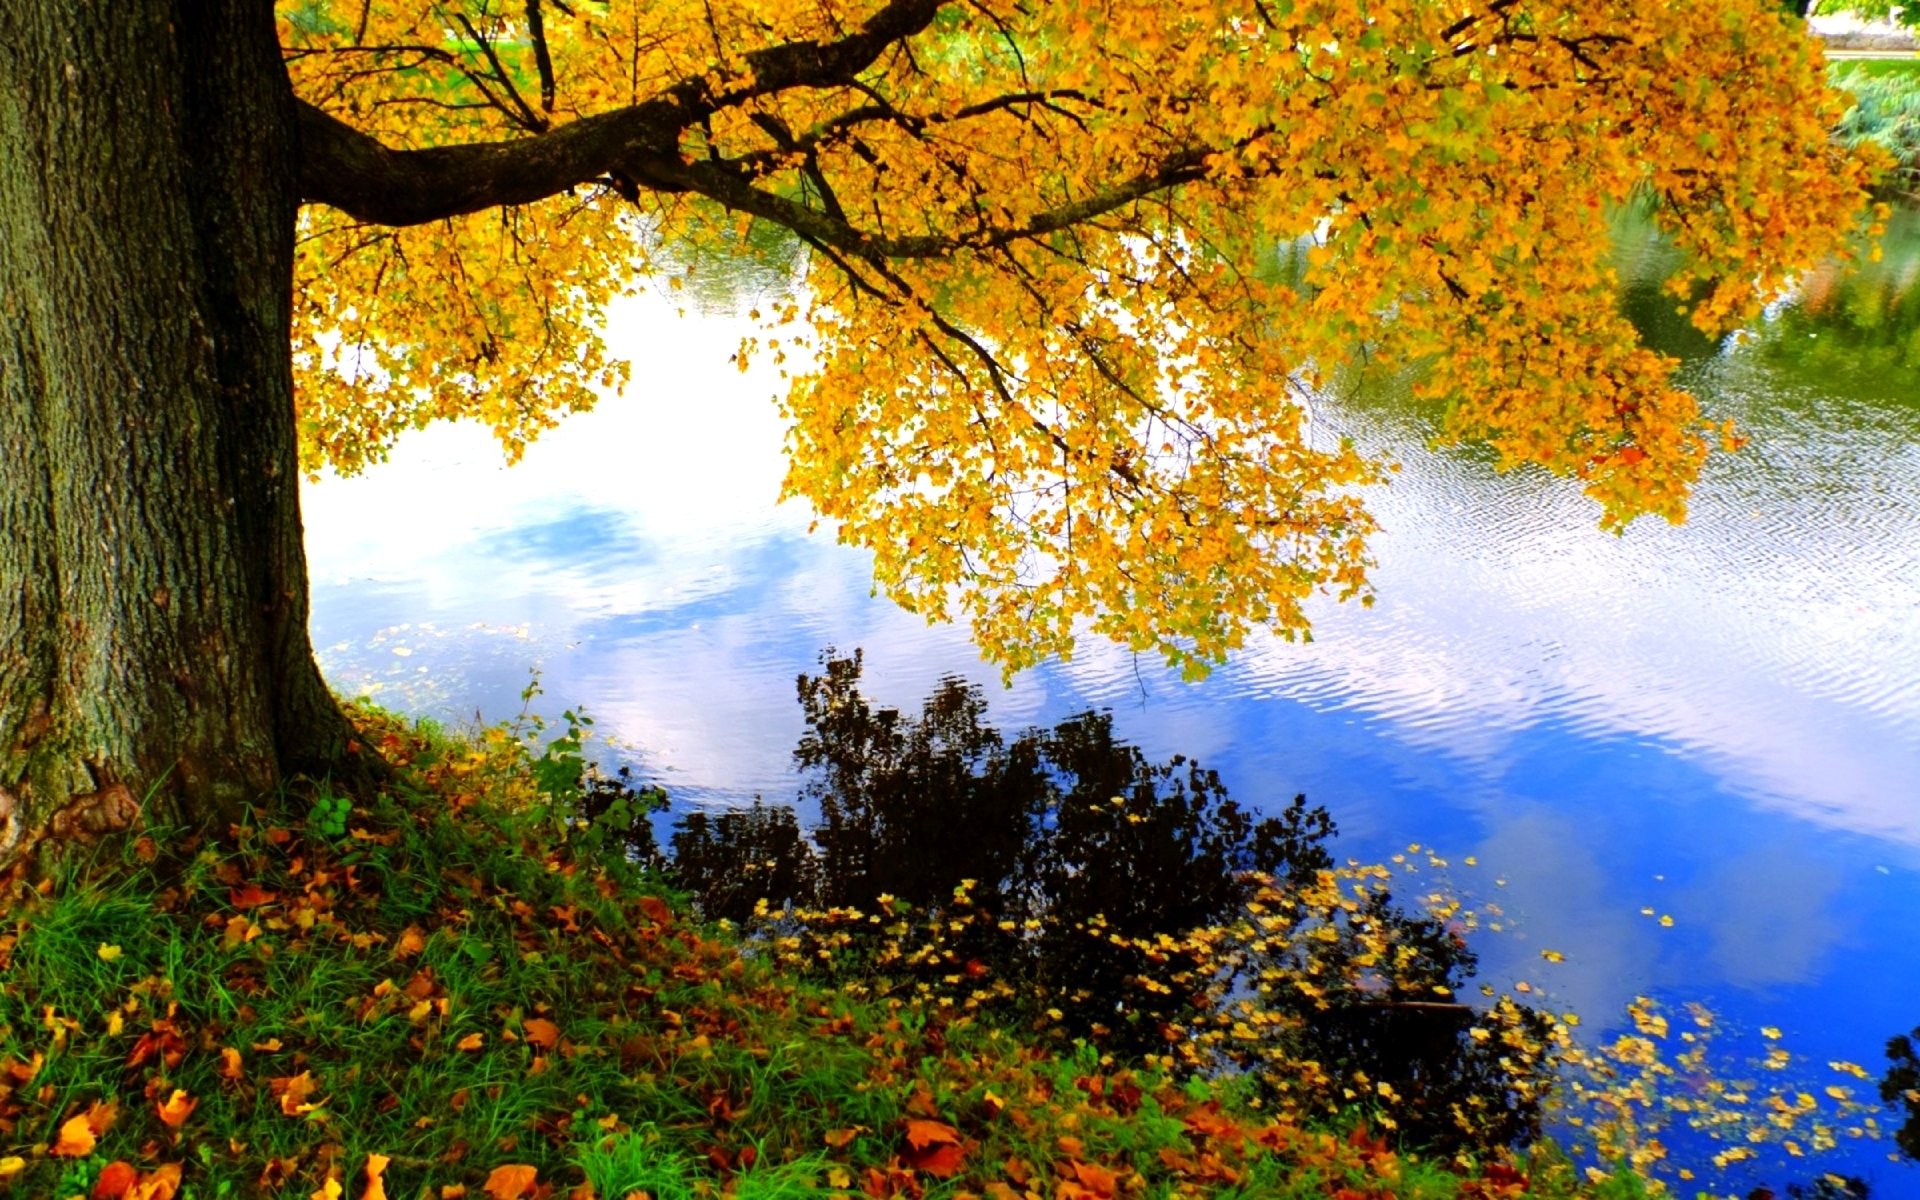 Autumn Tree by the Lake